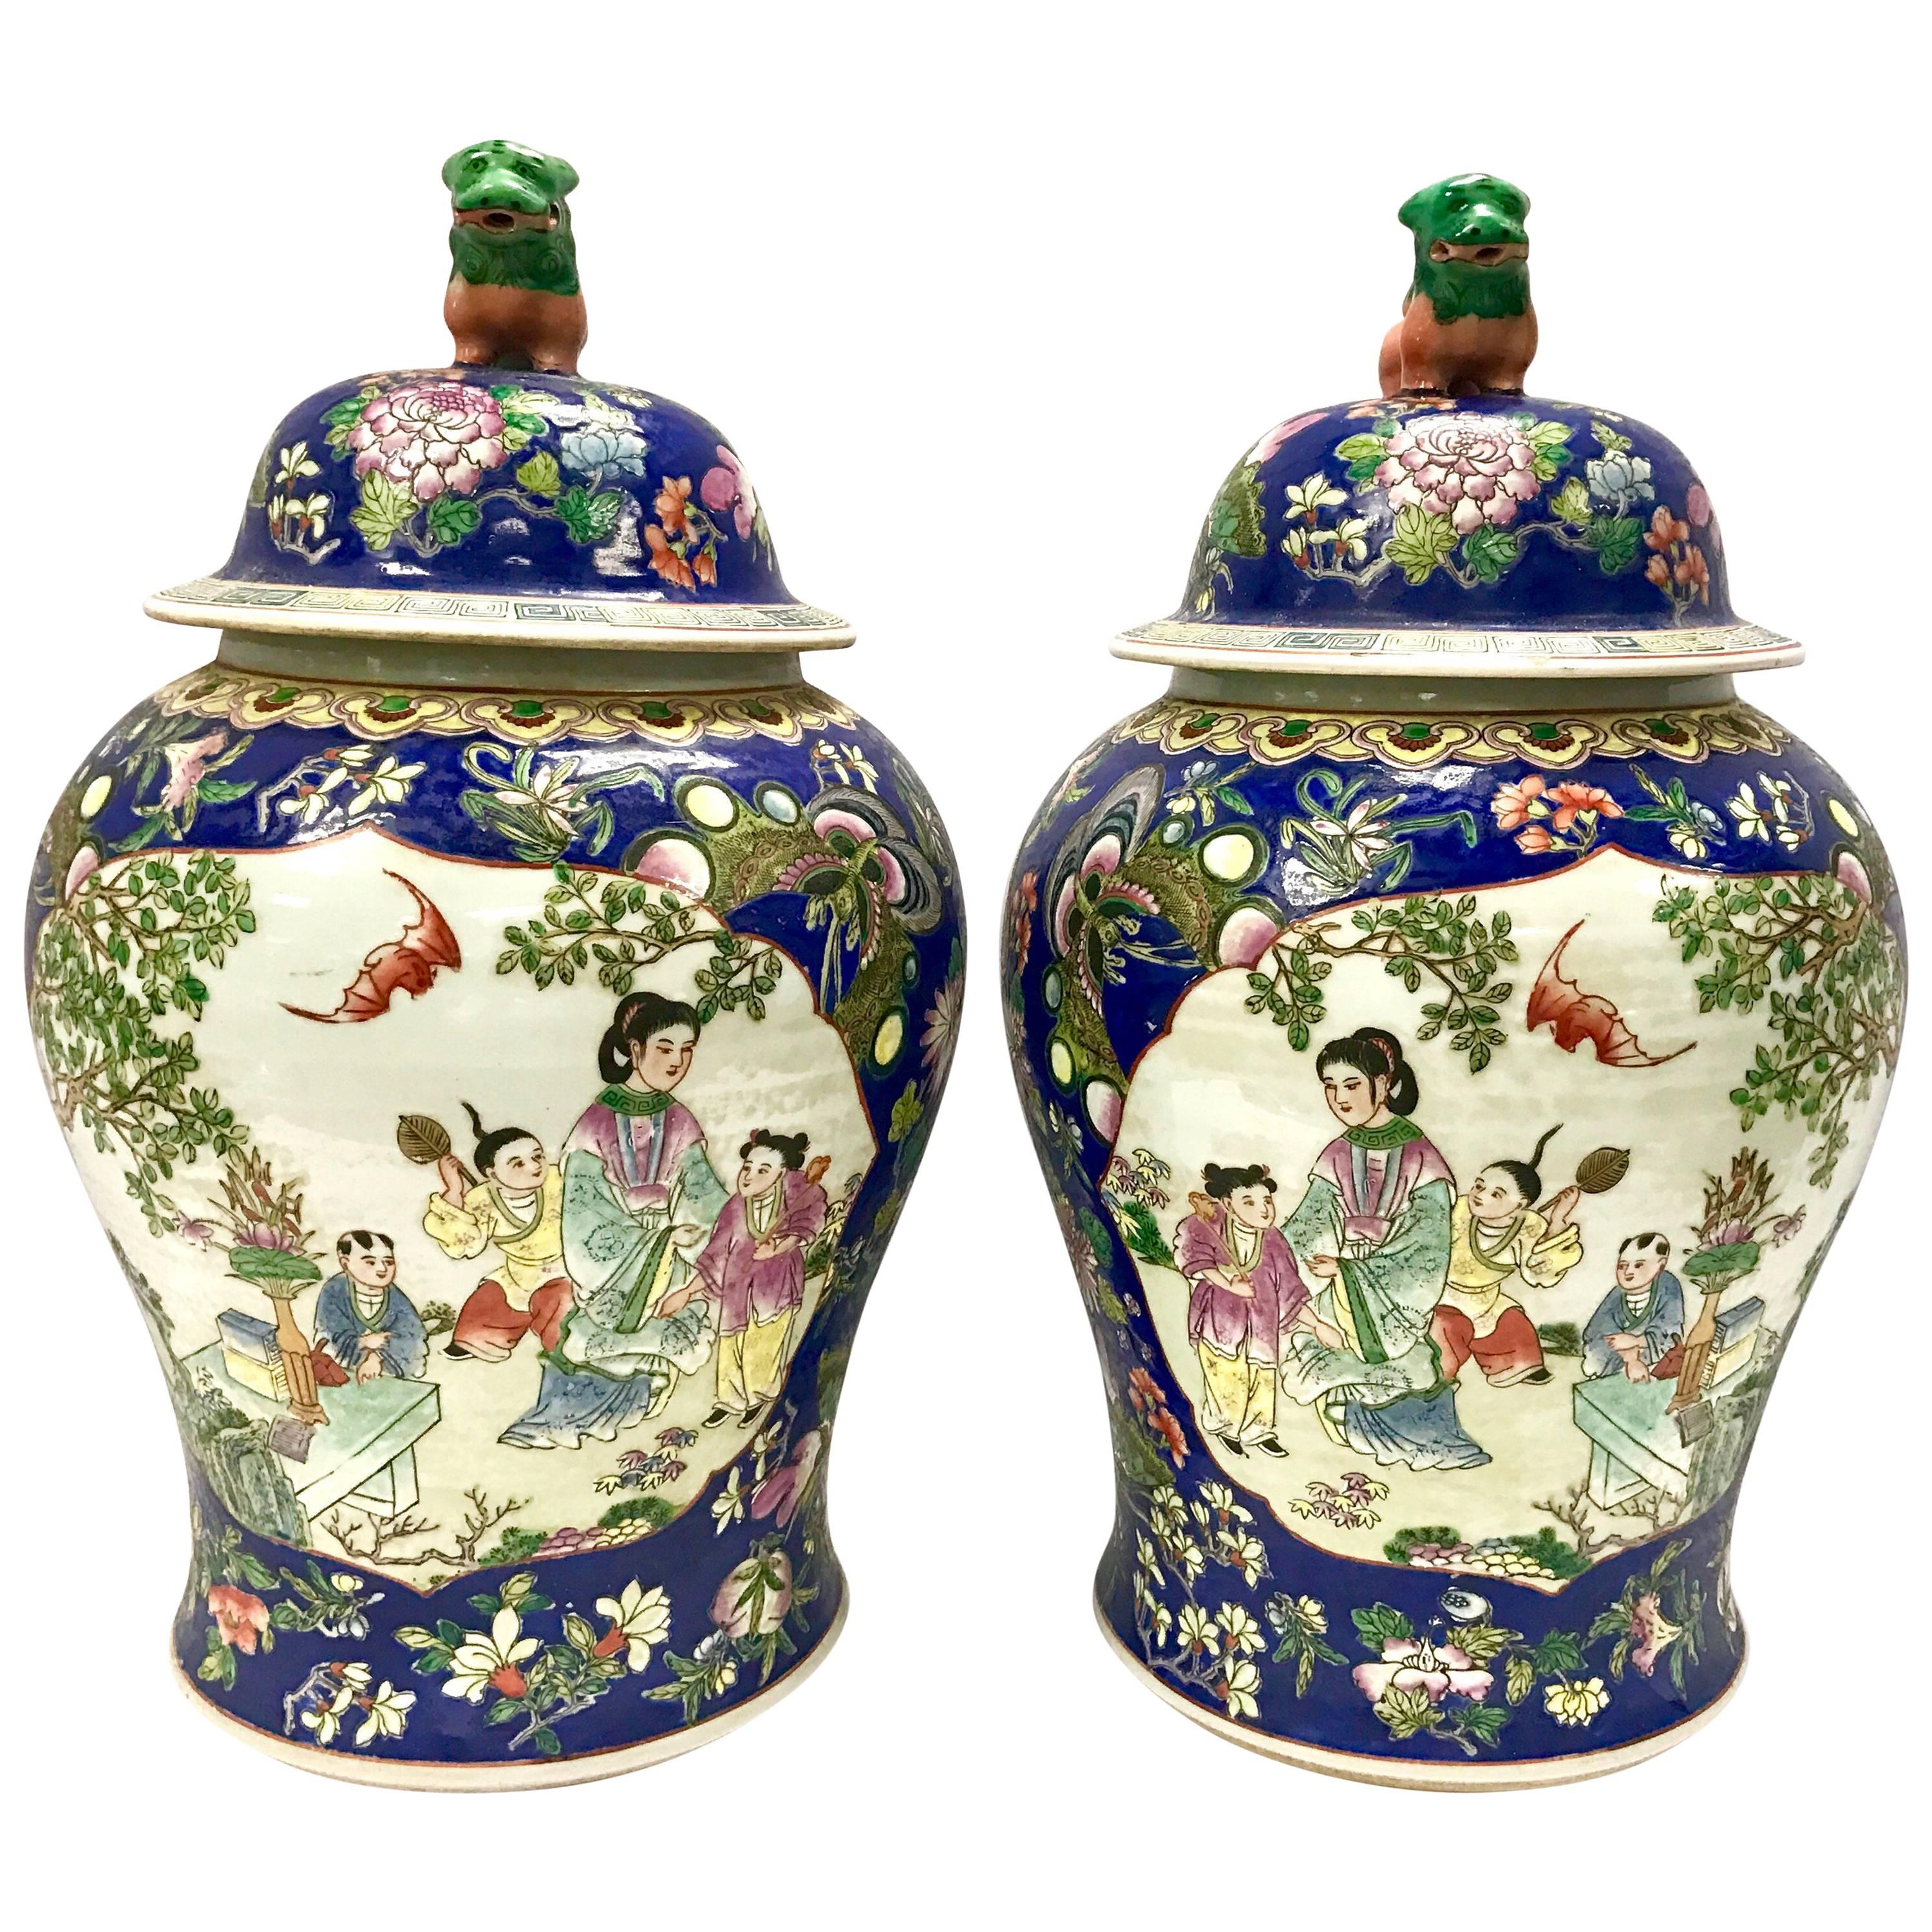 Pair of Large Blue Chinese Jars Urns Vessels with Foo Dogs